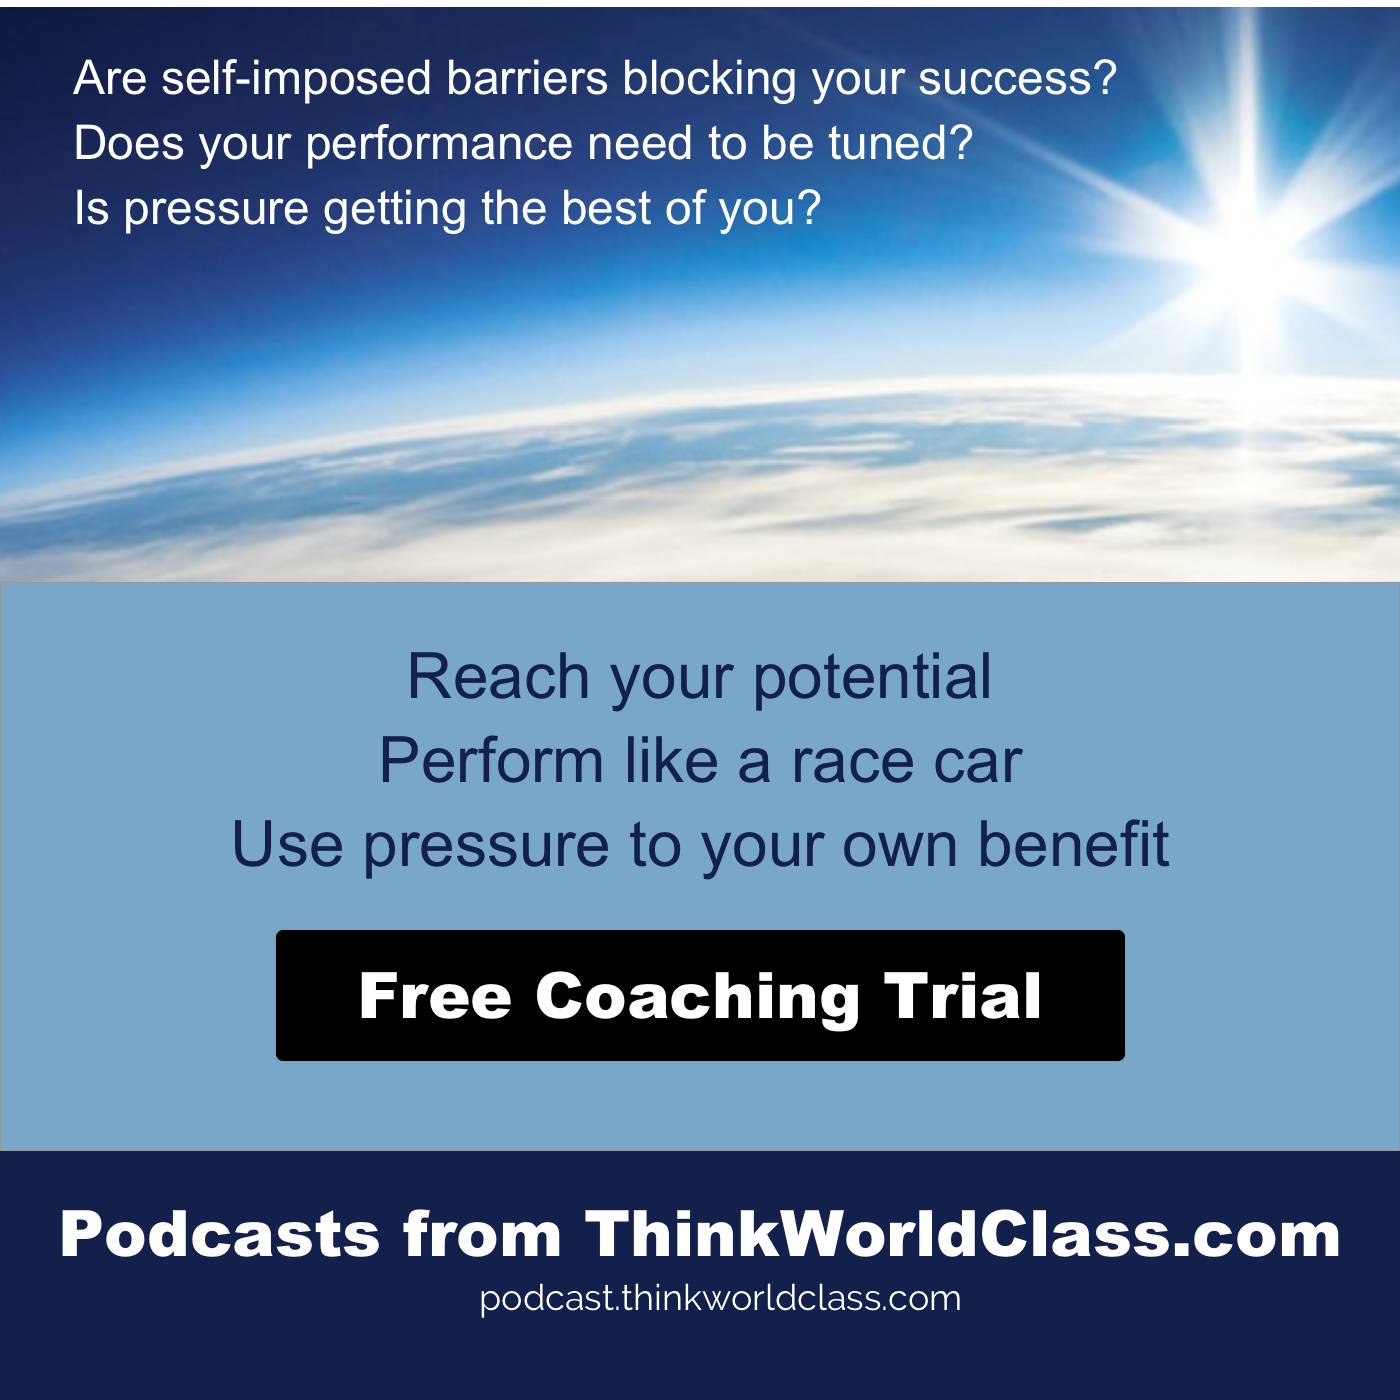 Think World Class - Podcasts